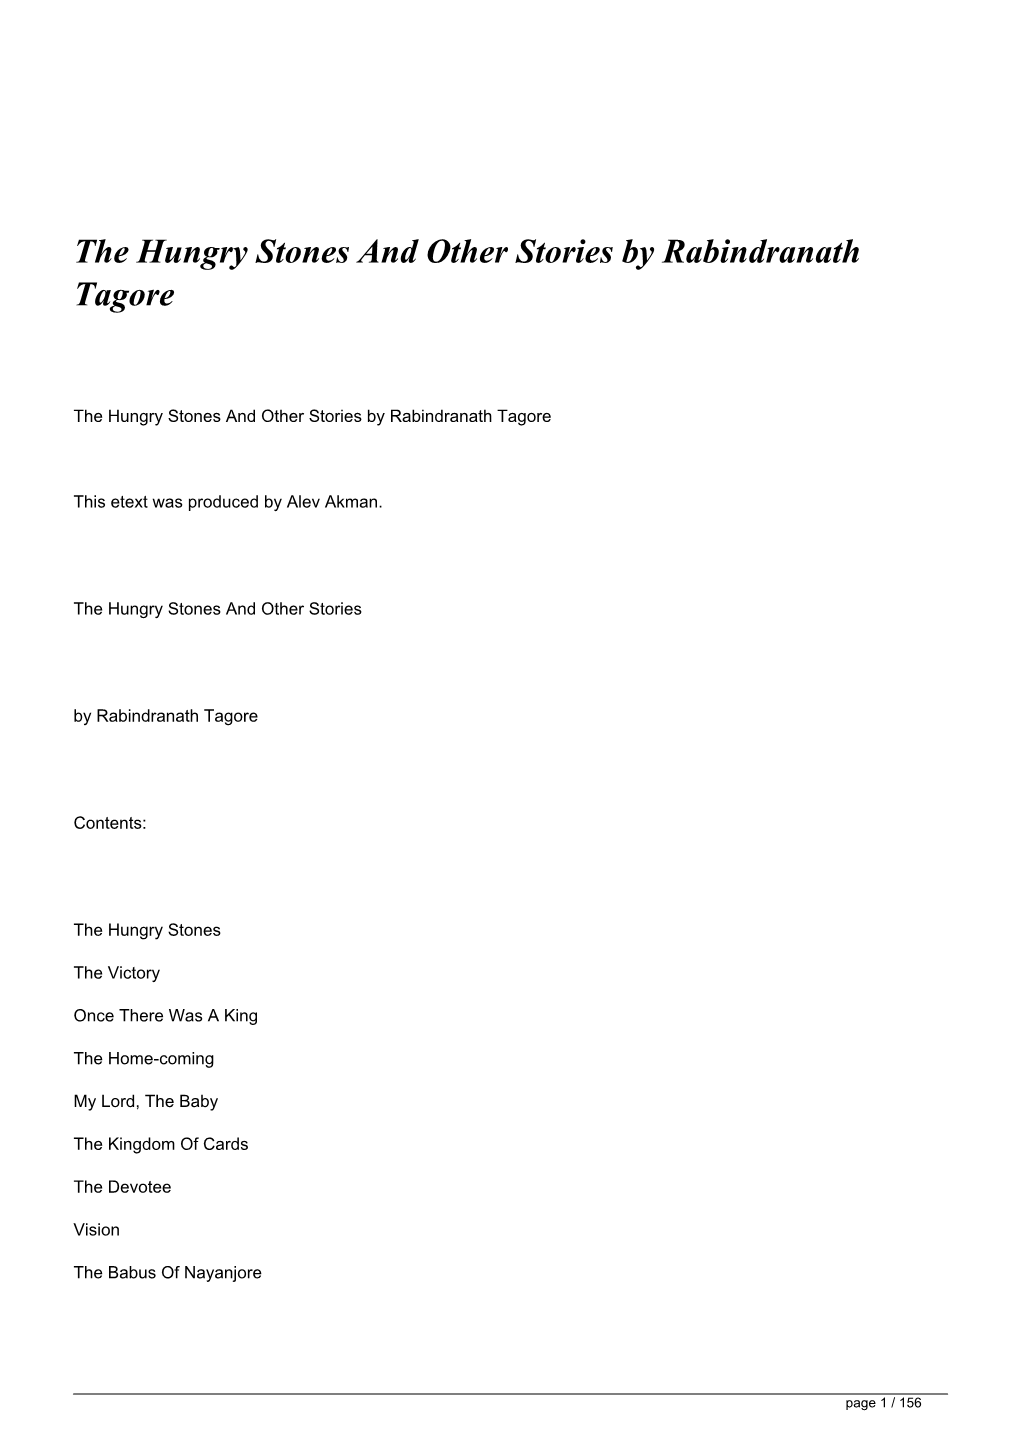 The Hungry Stones and Other Stories by Rabindranath Tagore&lt;/H1&gt;